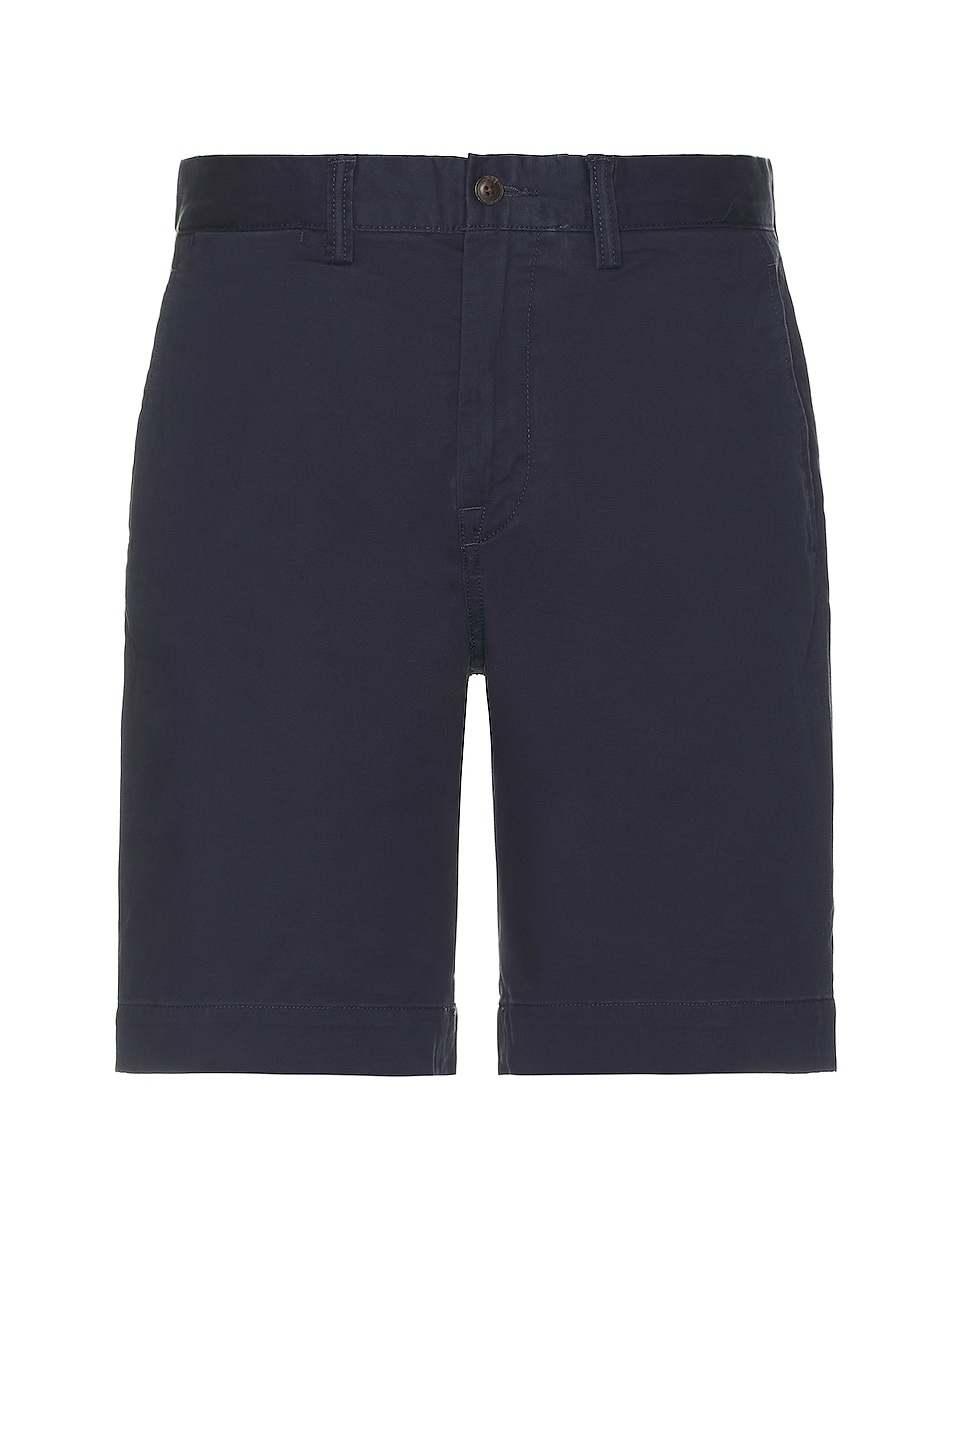 Image 1 of Polo Ralph Lauren Stretch Chino Short in Nautical Ink